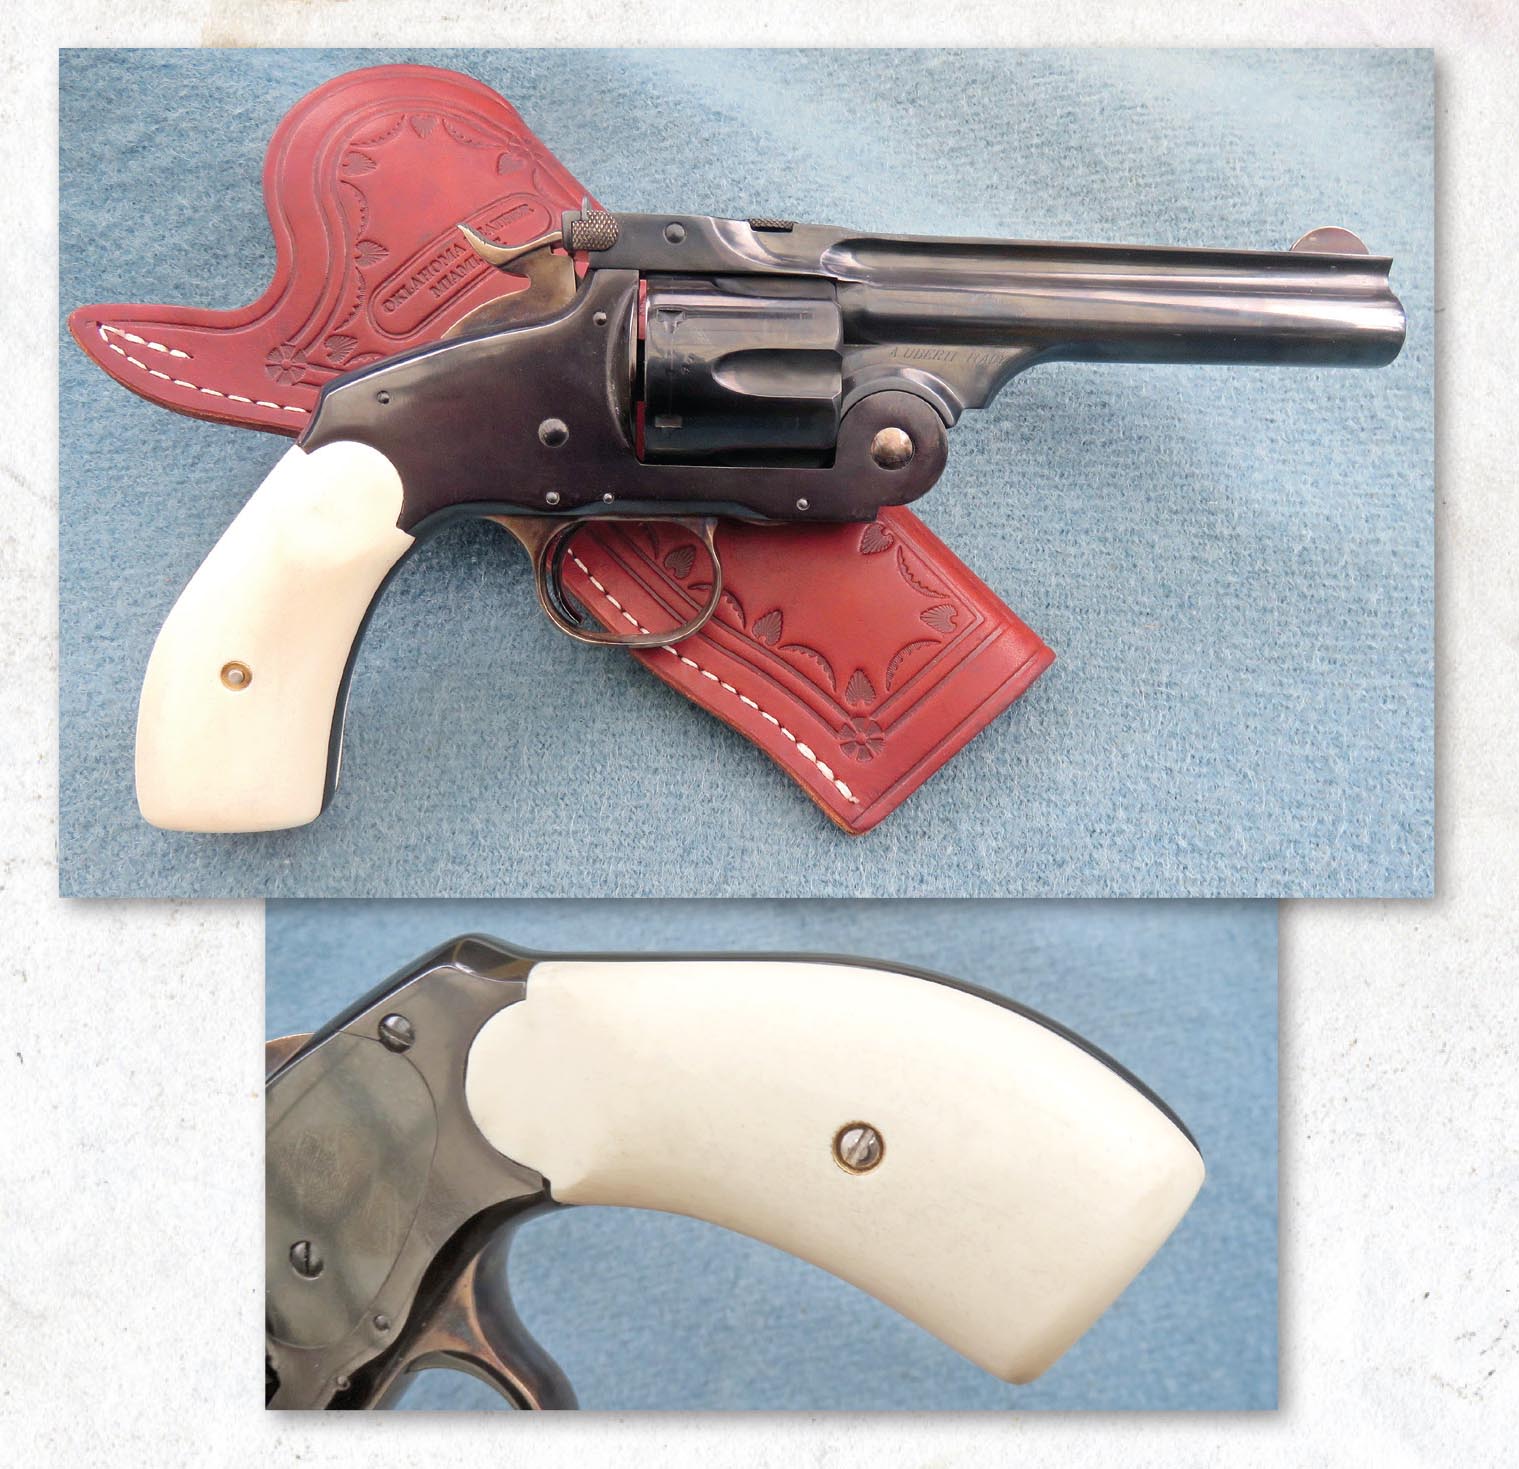 Here is the Laramie revolver, fitted with its "ivory" Gripmaker grips.